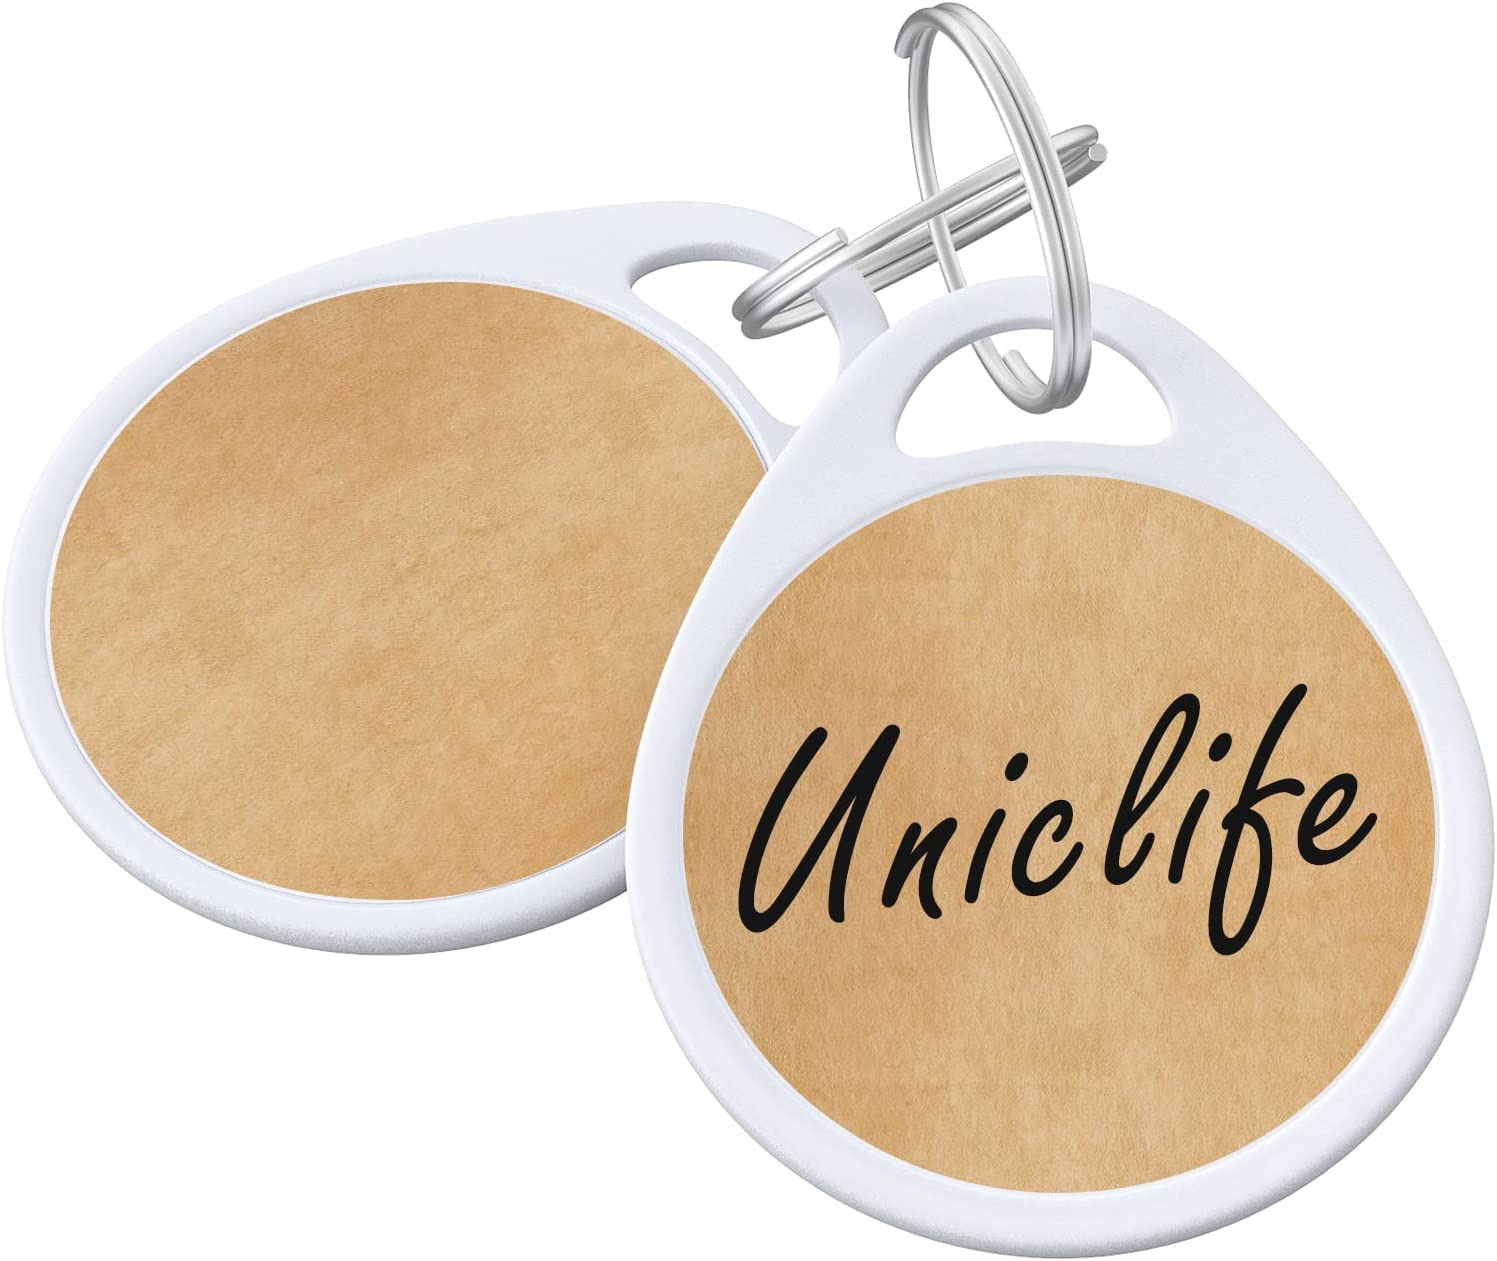 Uniclife 1.5 Inch Tough Plastic Key Tags Sturdy round White Item Identifiers wit